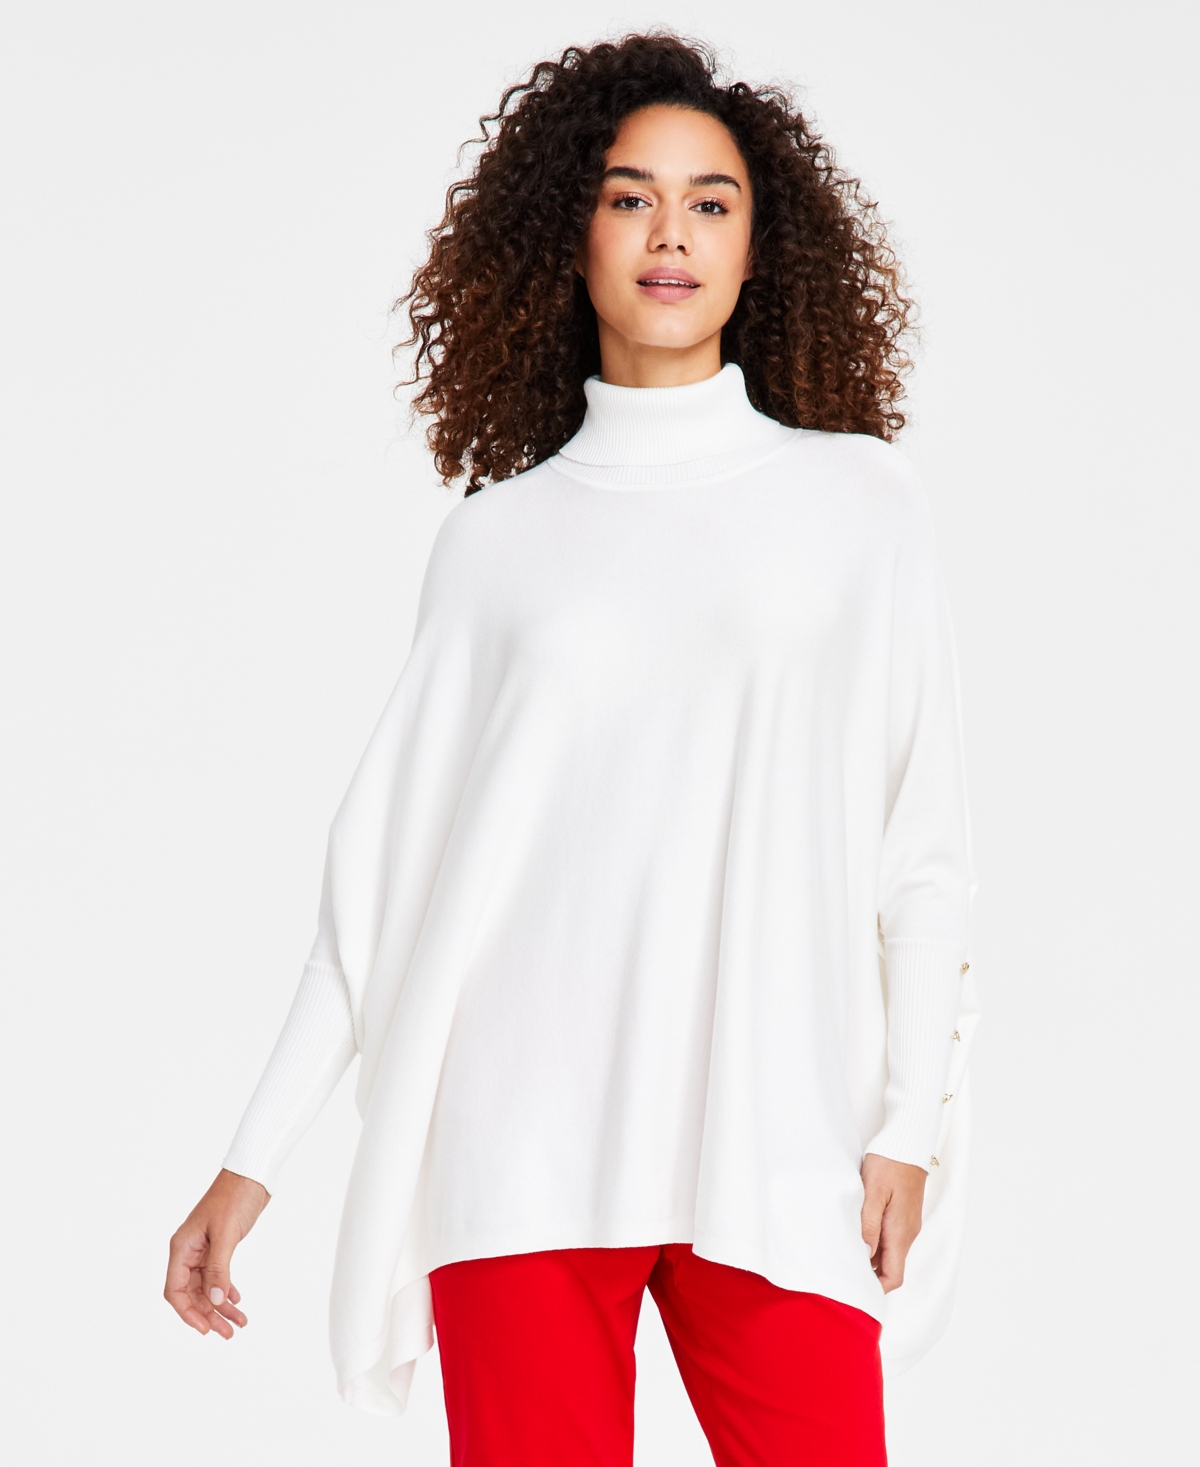 JM COLLECTION WOMEN'S SOLID-COLOR PONCHO TURTLENECK SWEATER, REGULAR & PETITE, CREATED FOR MACY'S